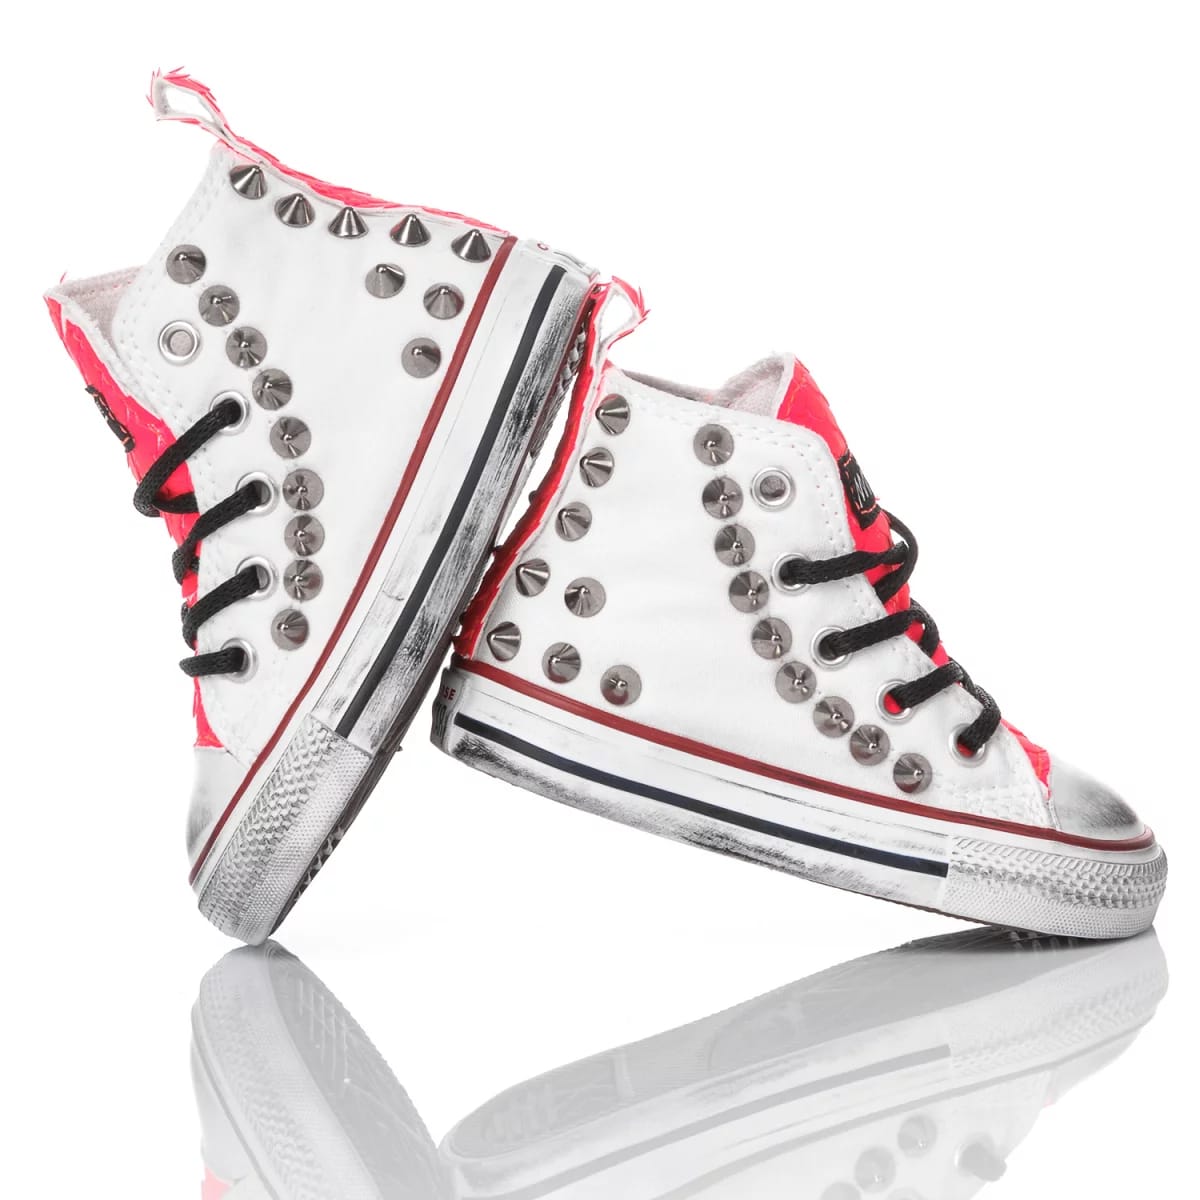 Shop Mimanera Converse Baby Fuxia Spike Customized